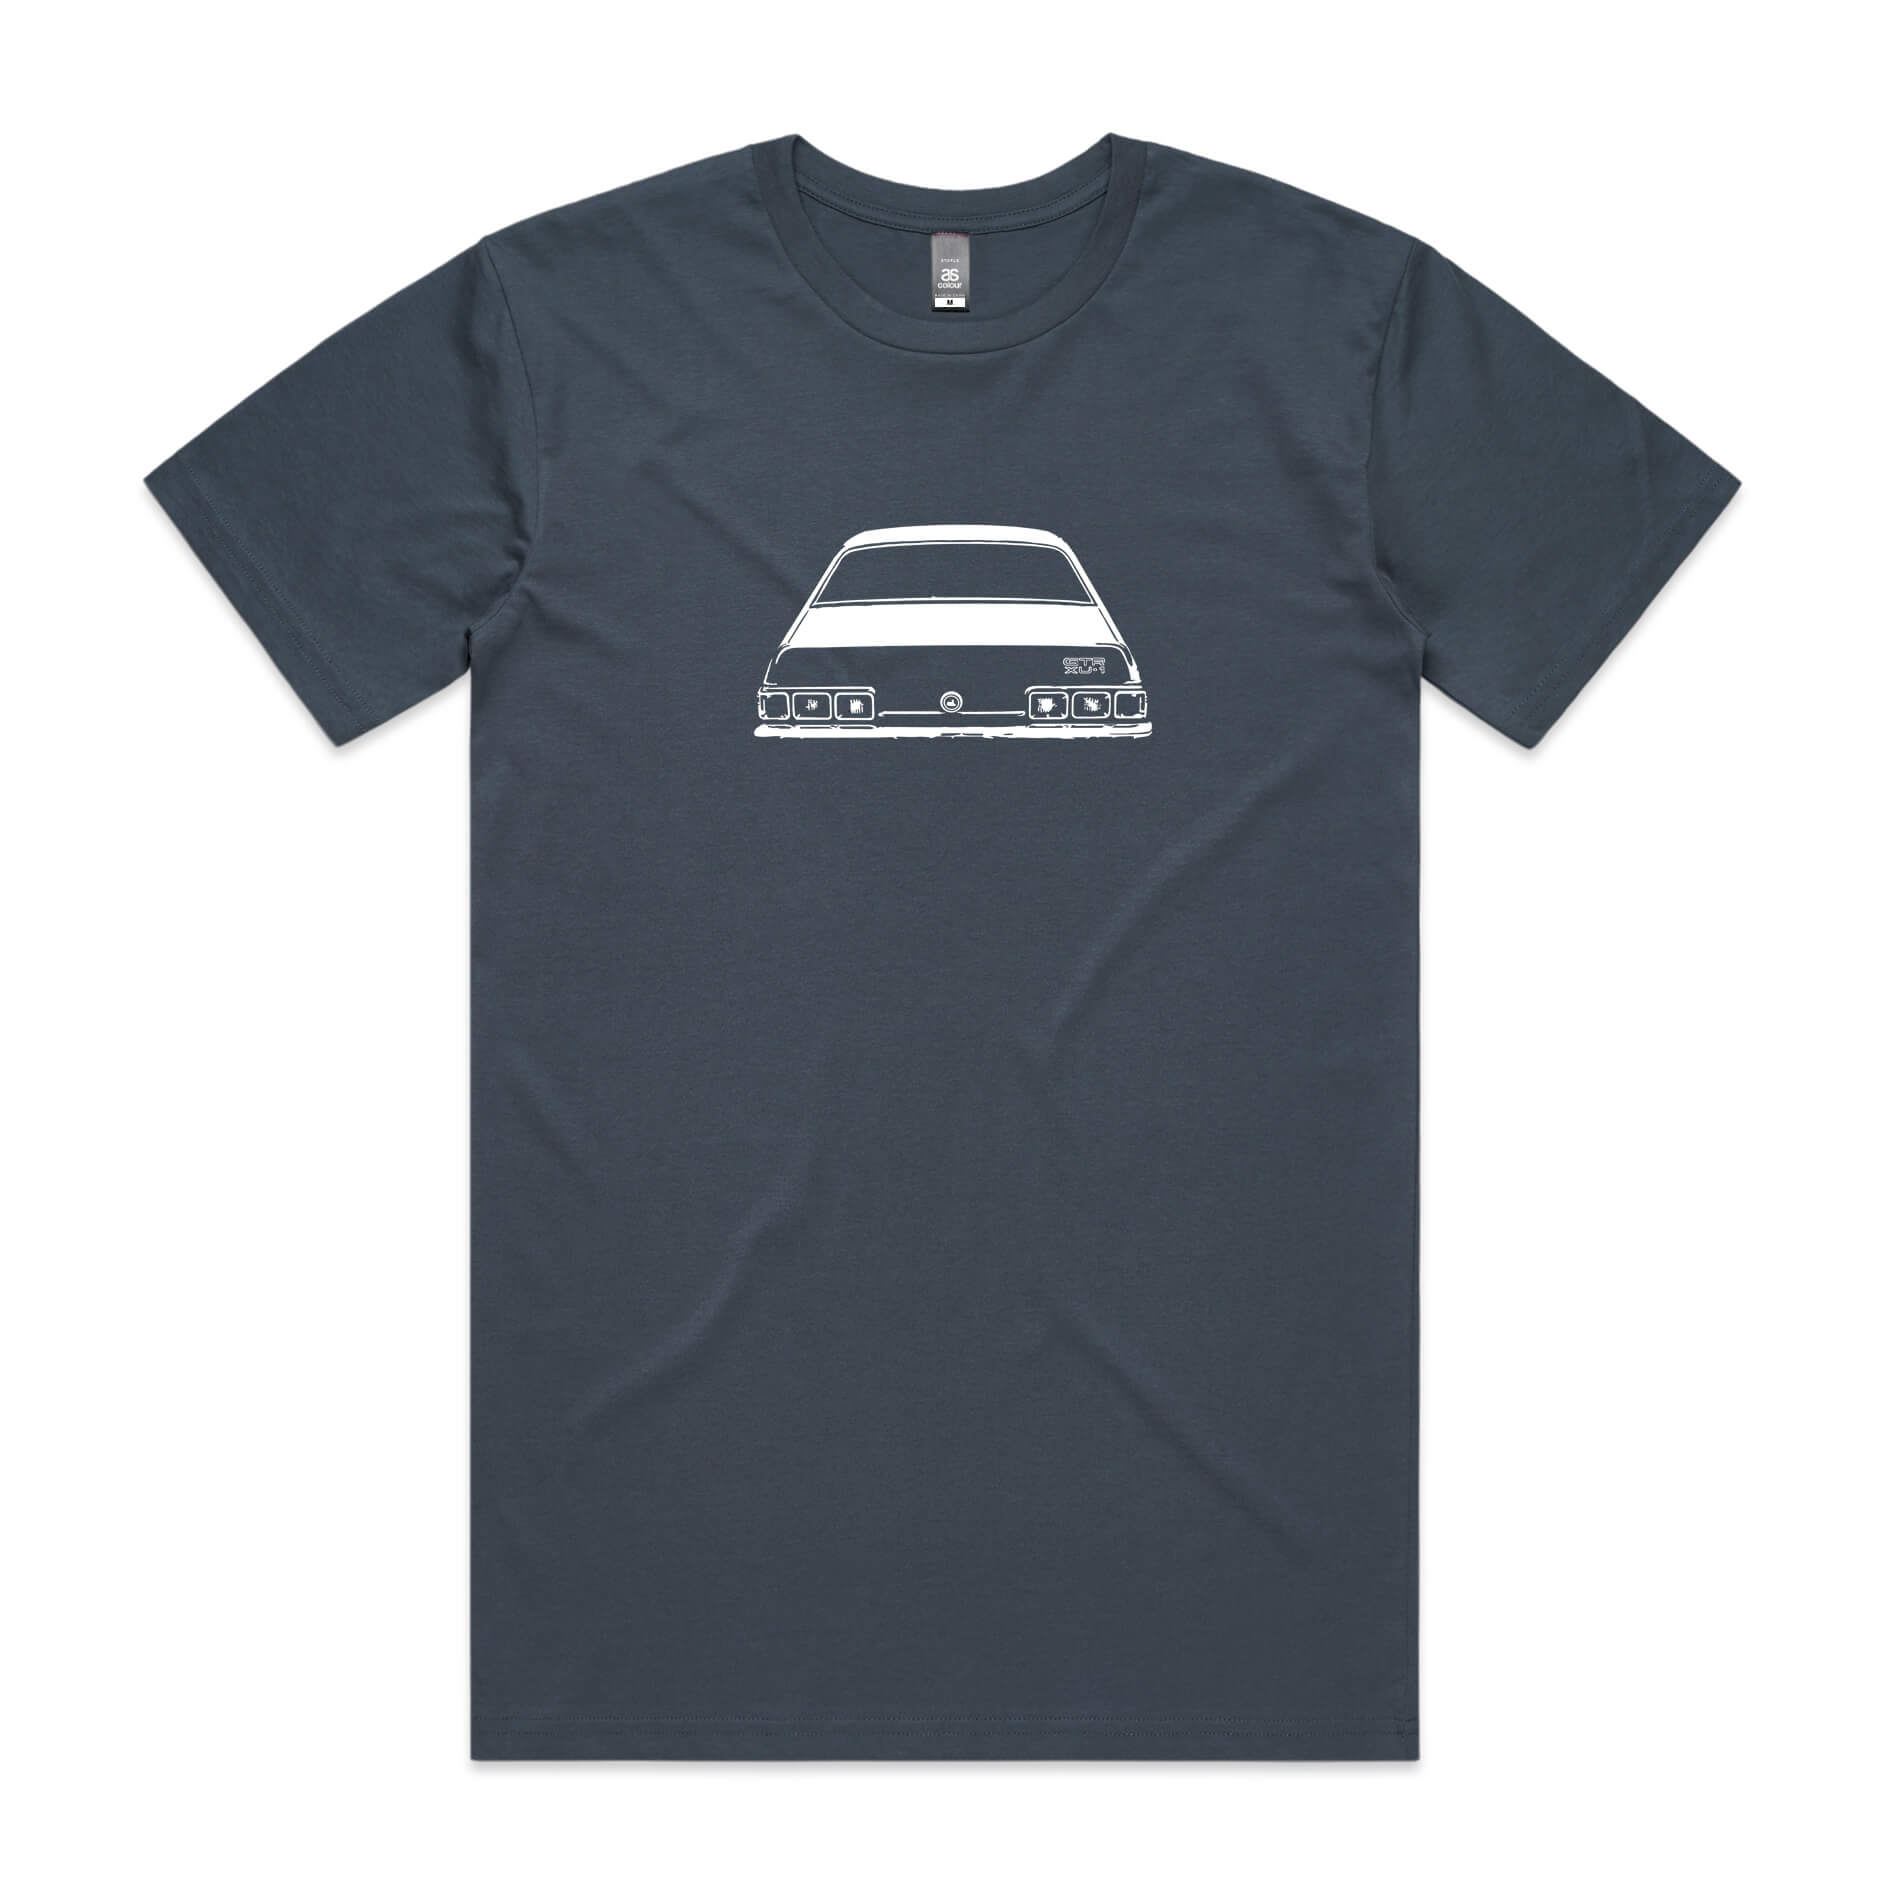 Holden LJ Torana t-shirt in petrol blue with a white graphic of the GTR XU1 car